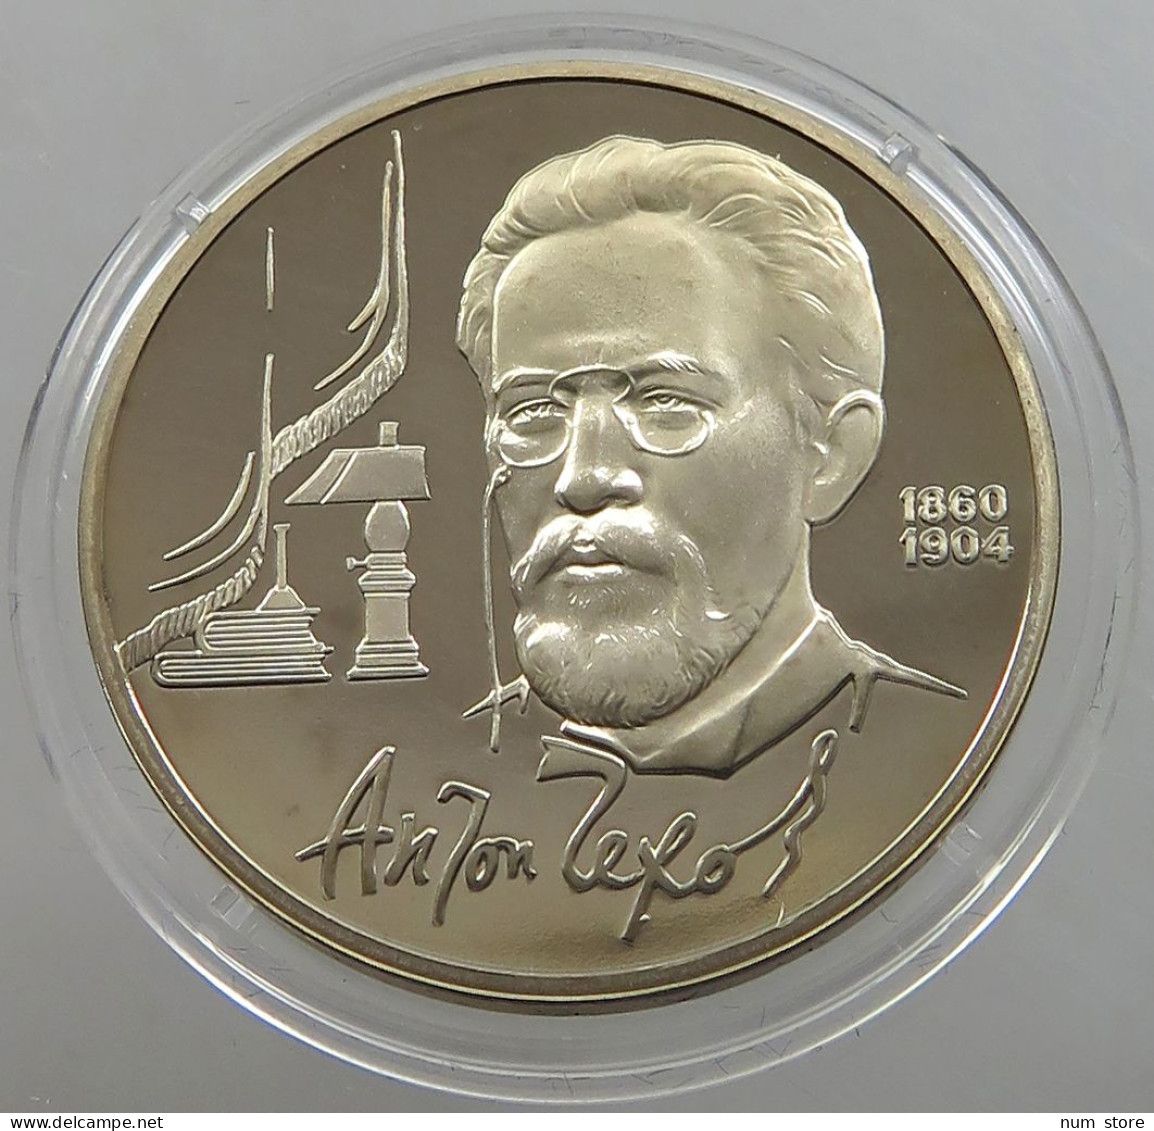 RUSSIA USSR 1 ROUBLE 1990 TSCHECHOW PROOF #sm14 0553 - Russia